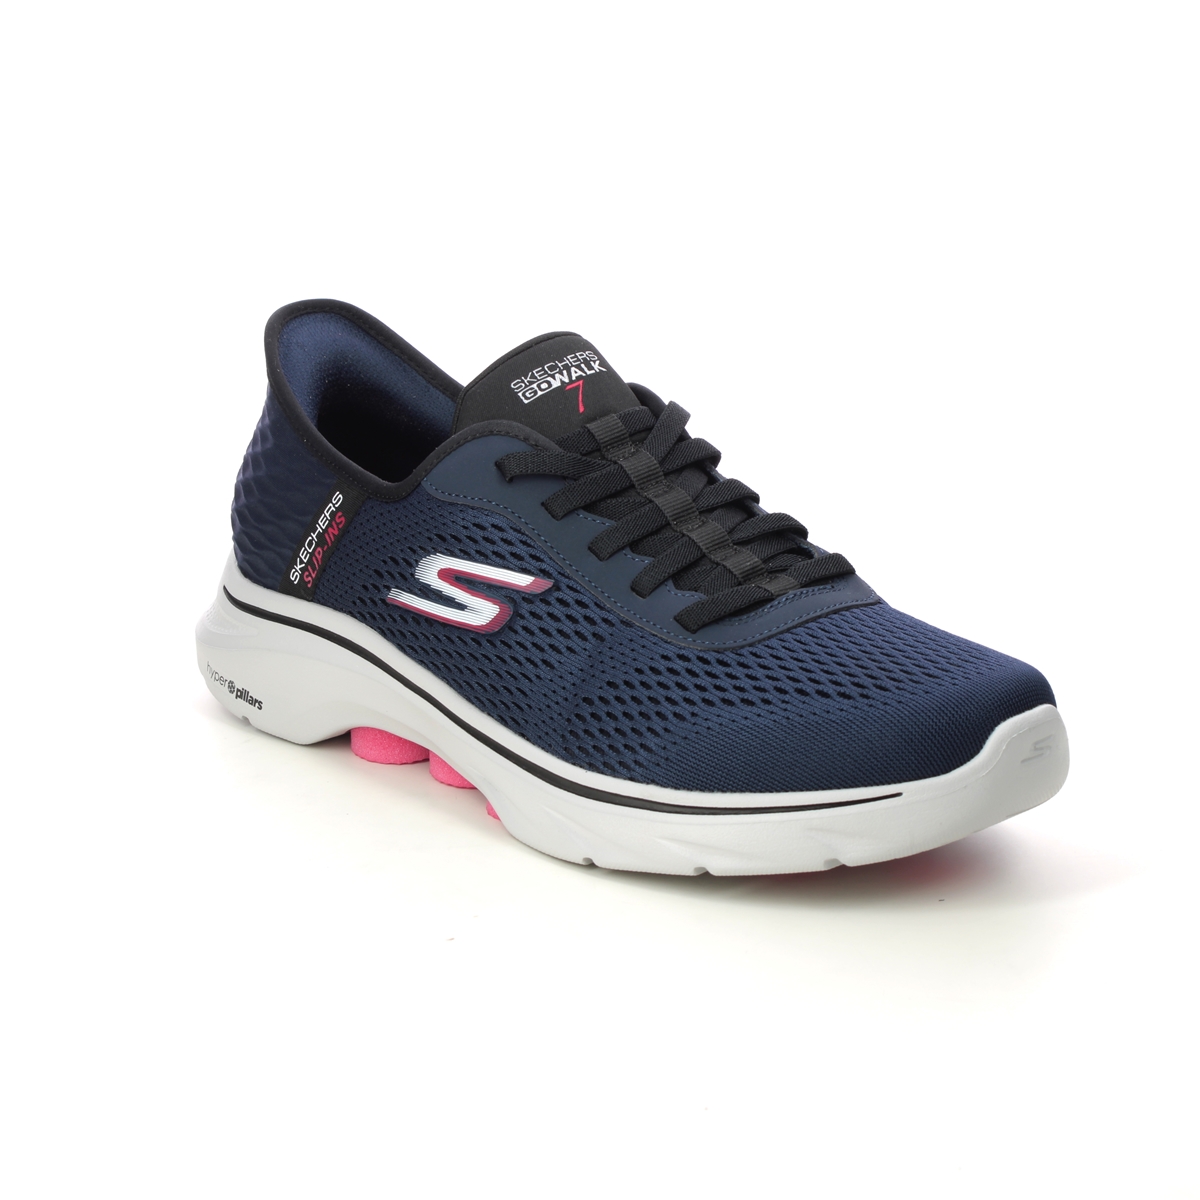 Skechers Slip Ins Go Walk 7 Bungee NVRD Navy Red Mens trainers 216648 in a Plain Textile in Size 12